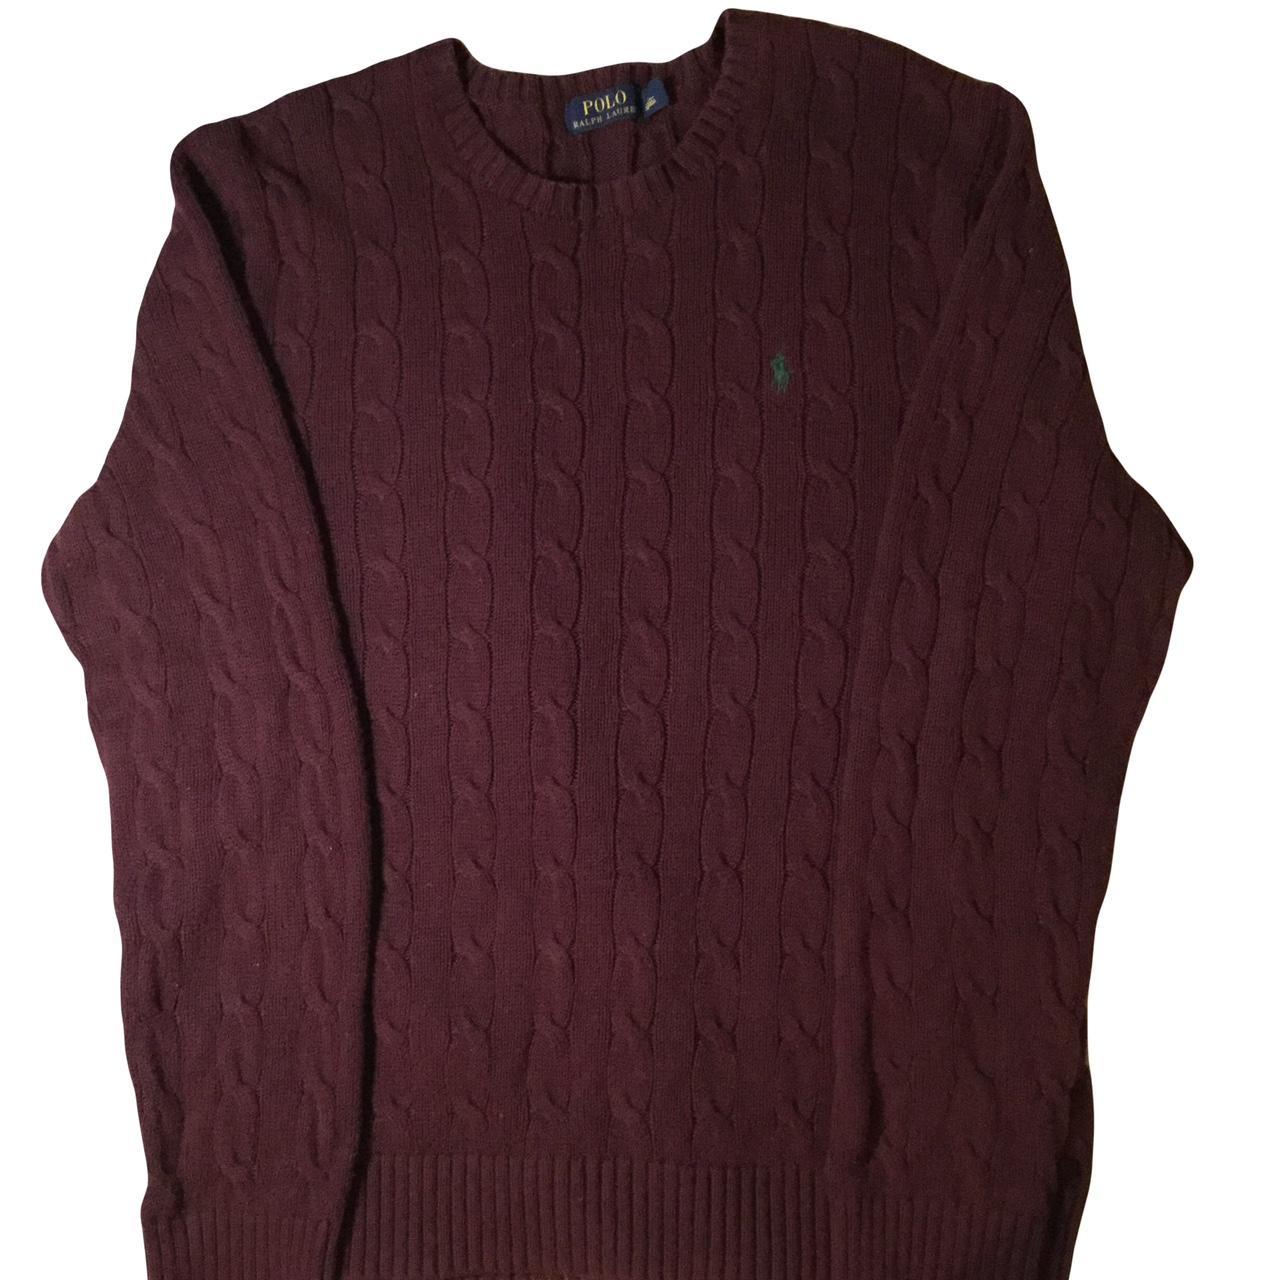 Ralph Lauren Burgundy Cable Knit Sweater Some signs... - Depop